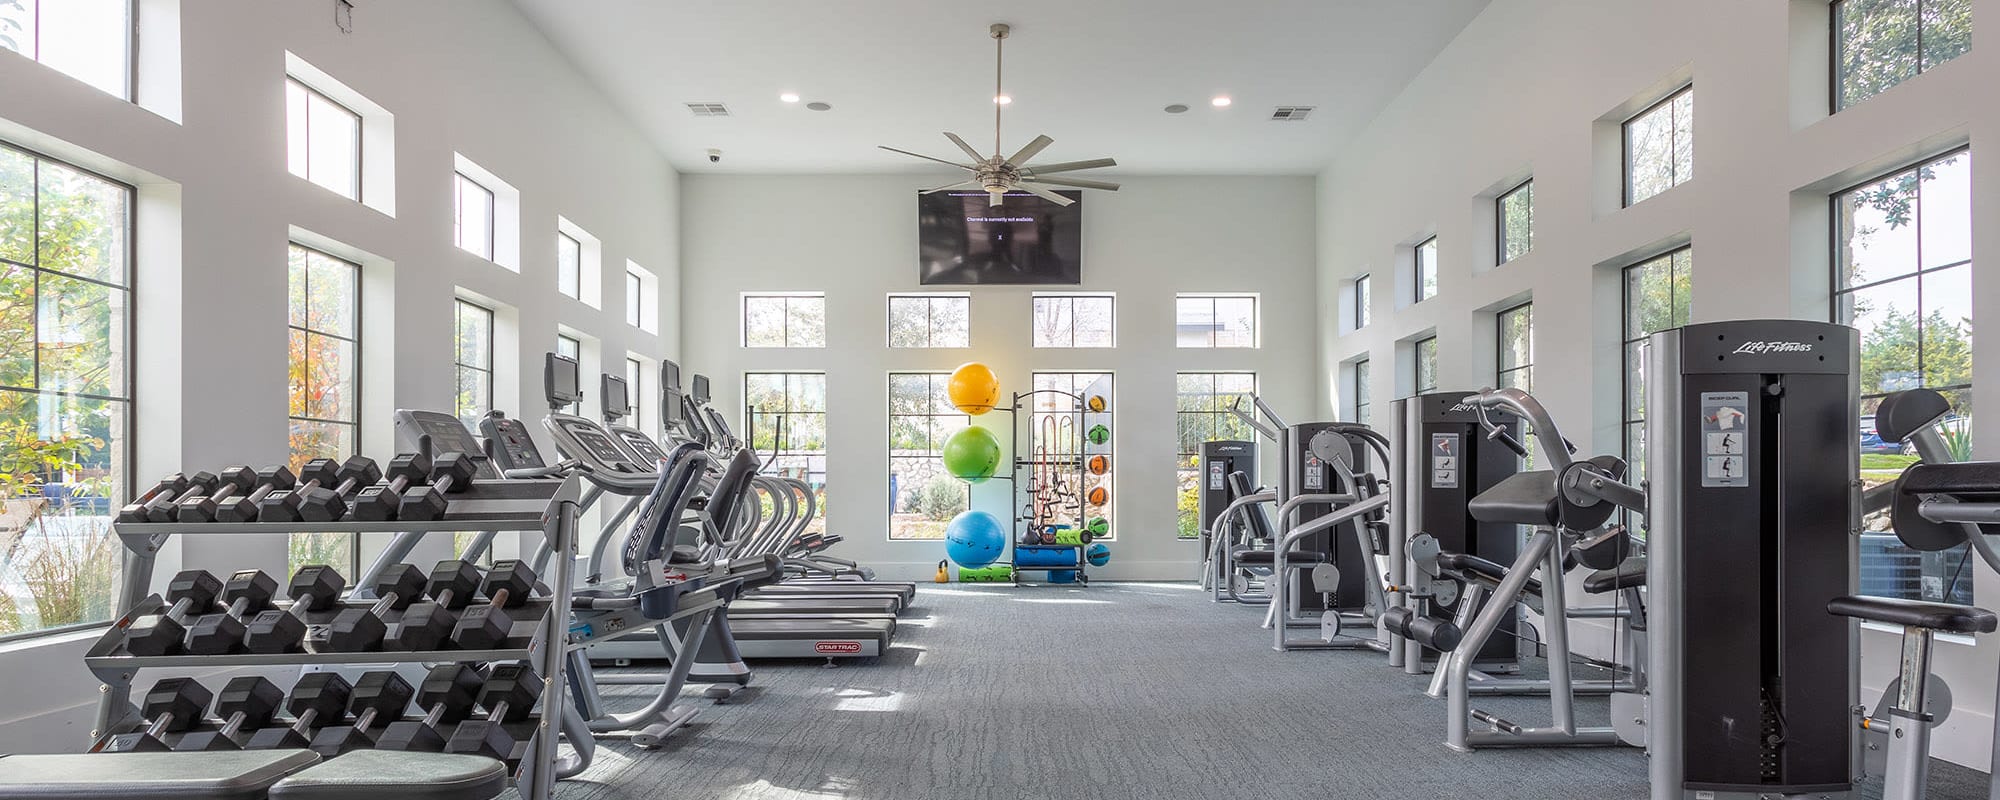 Fitness center at  Estates at Bee Cave in Bee Cave, TexasClean 